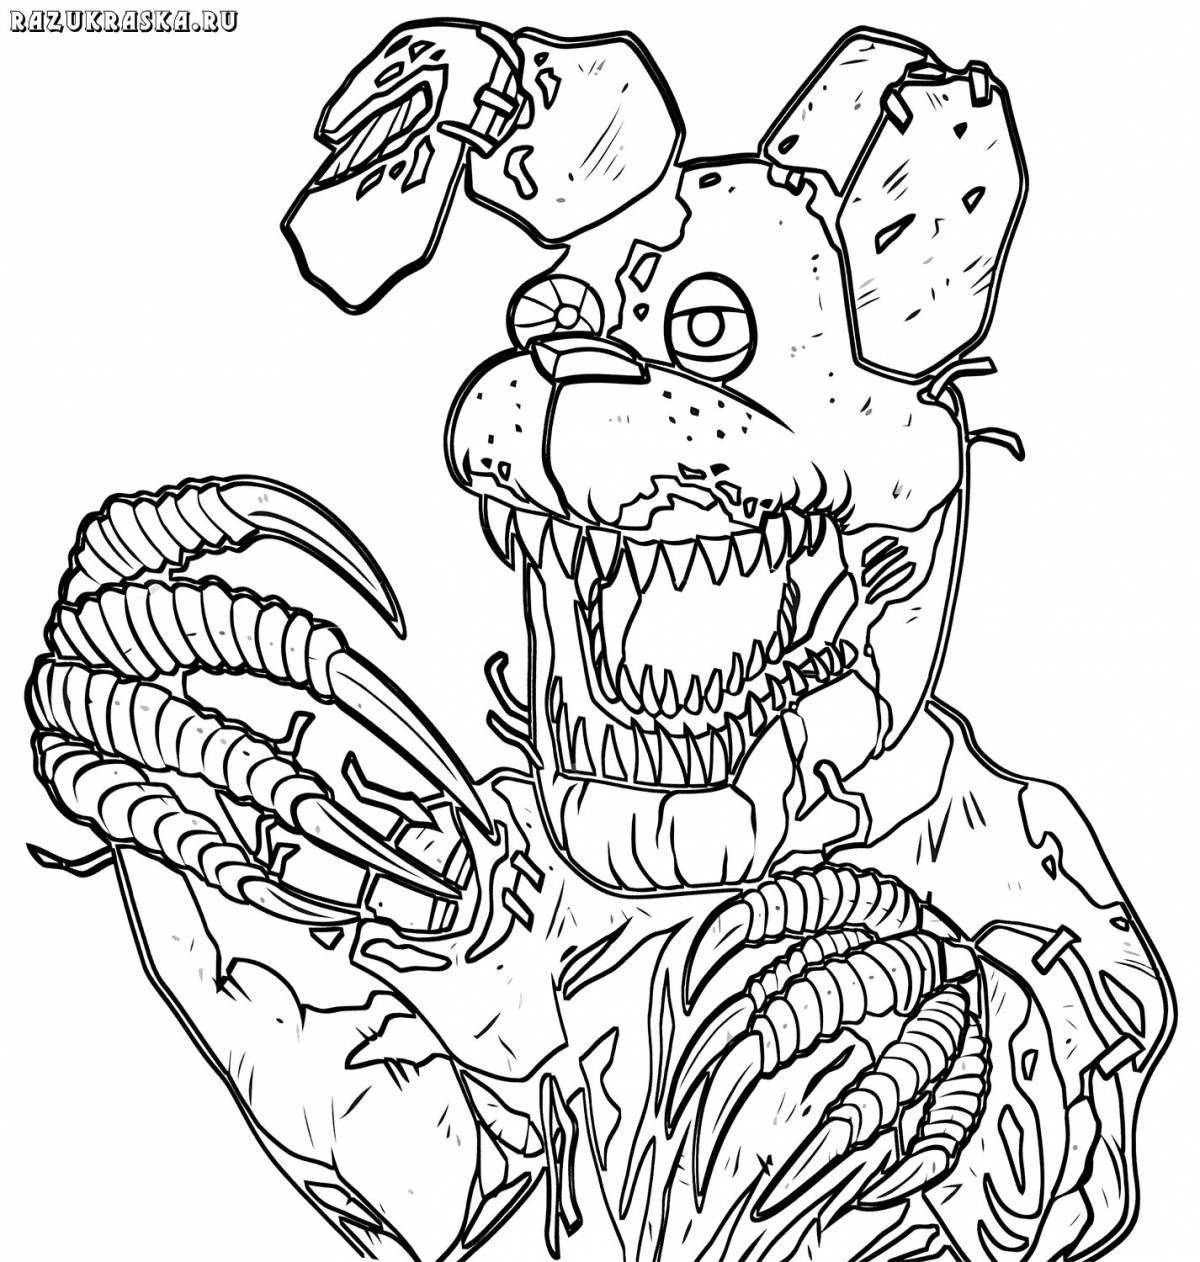 Attractive Five Nights at Freddy's Coloring Page